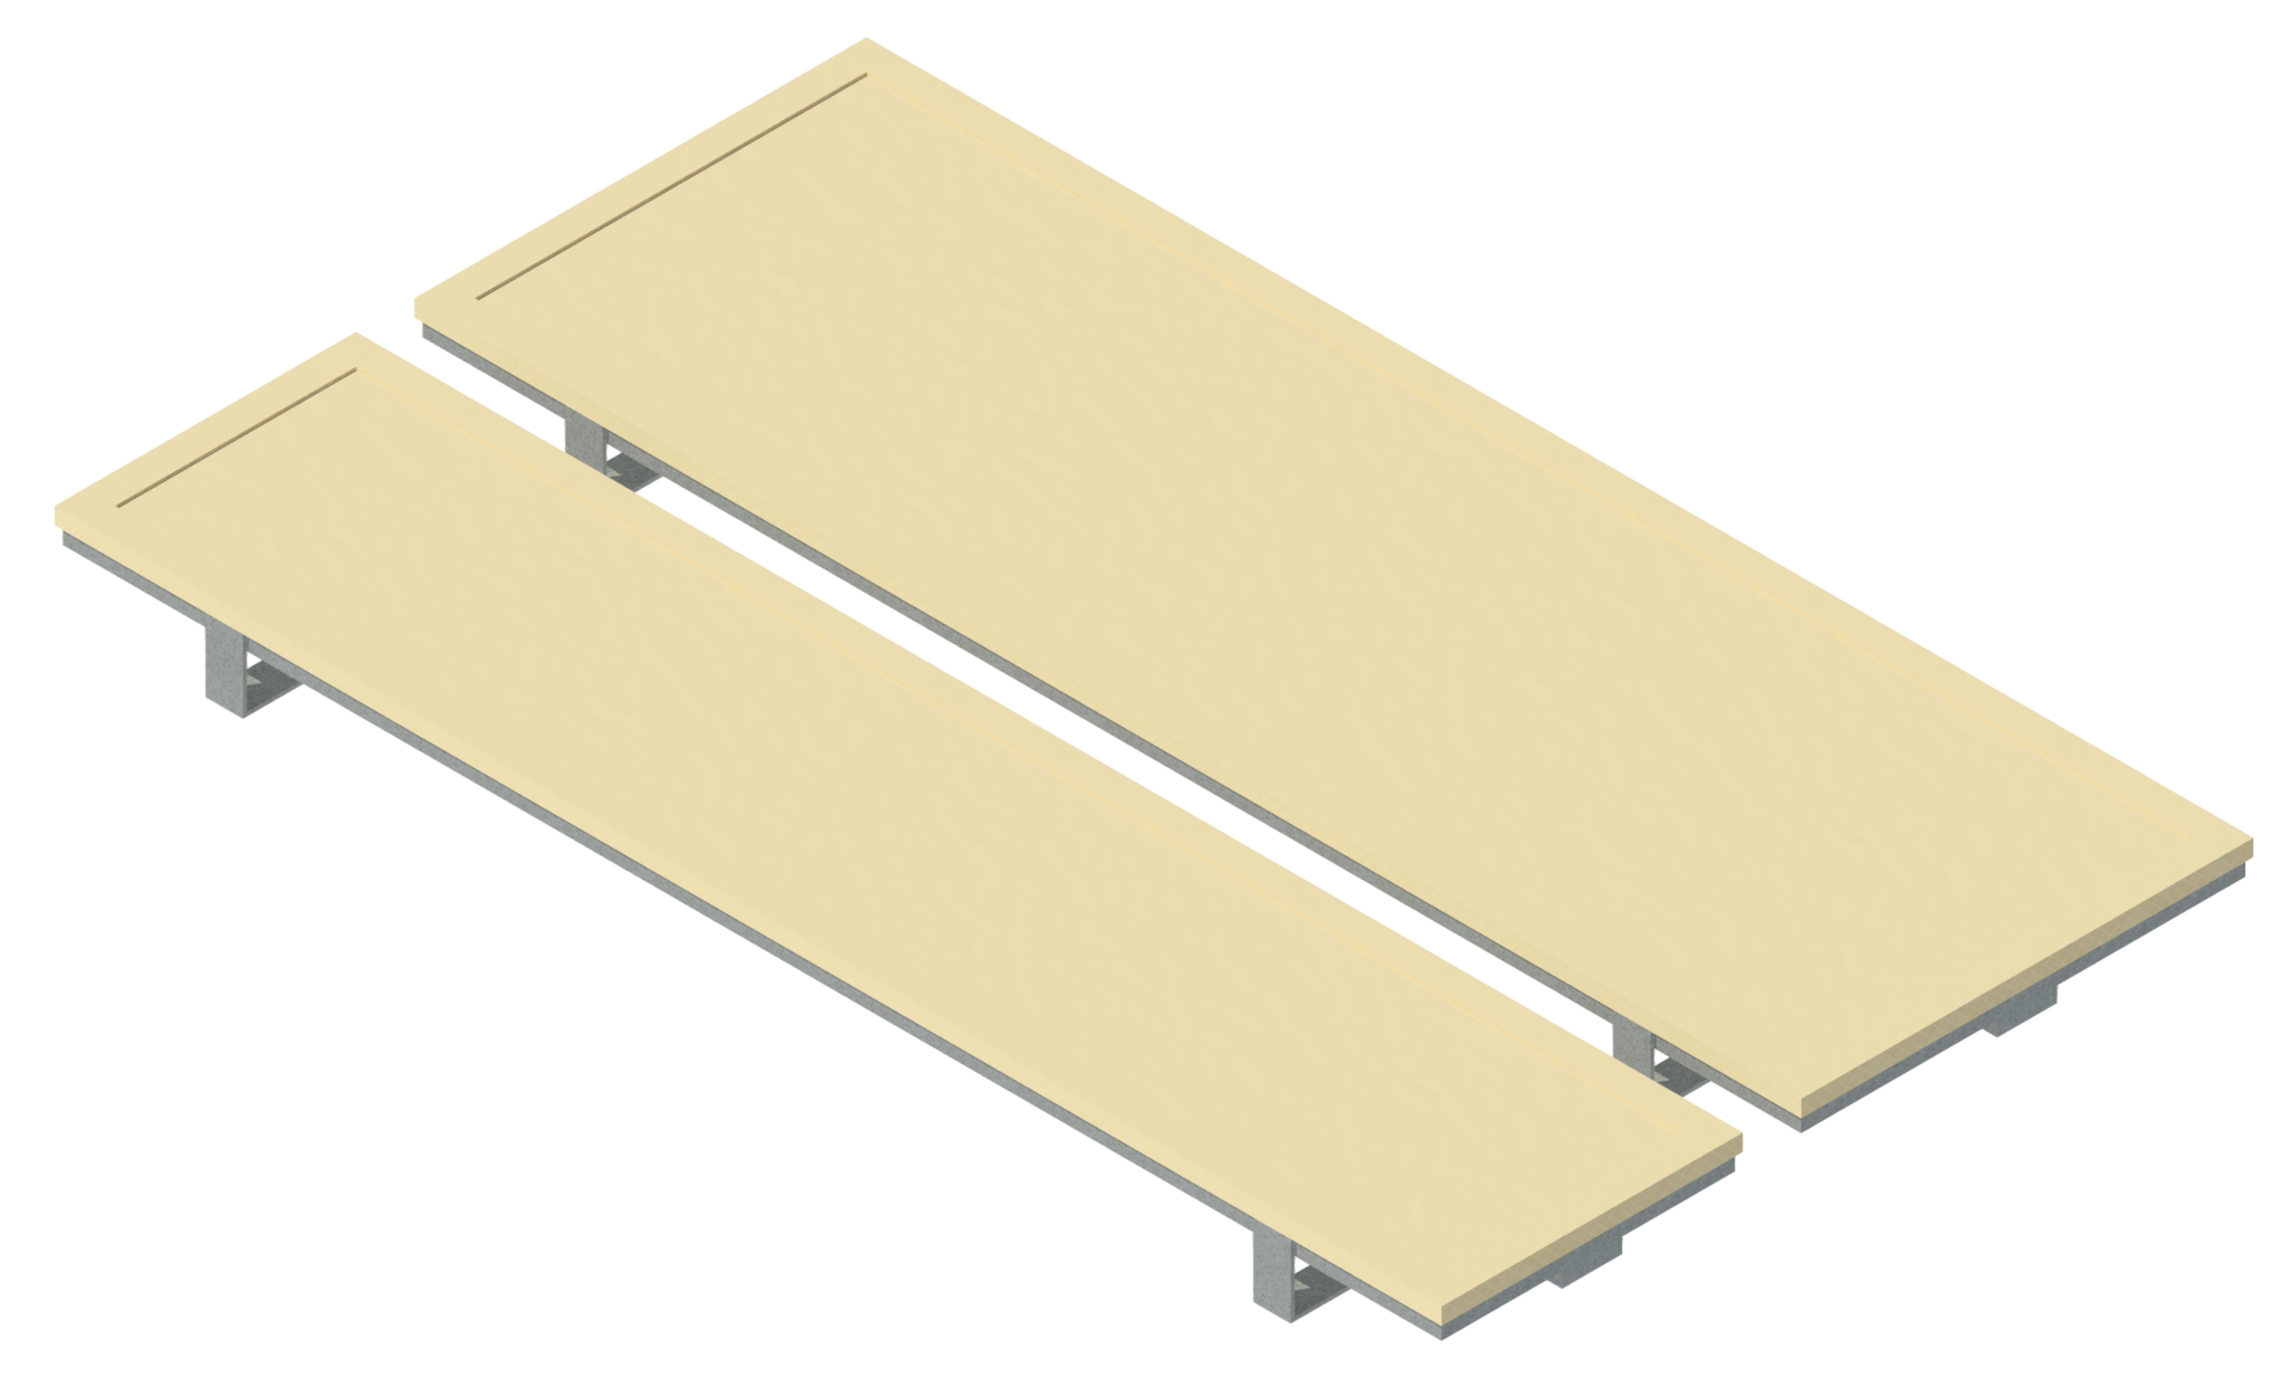 A render of two ceiling-mounted radiant heat panels from manufacturer WarmlyYours